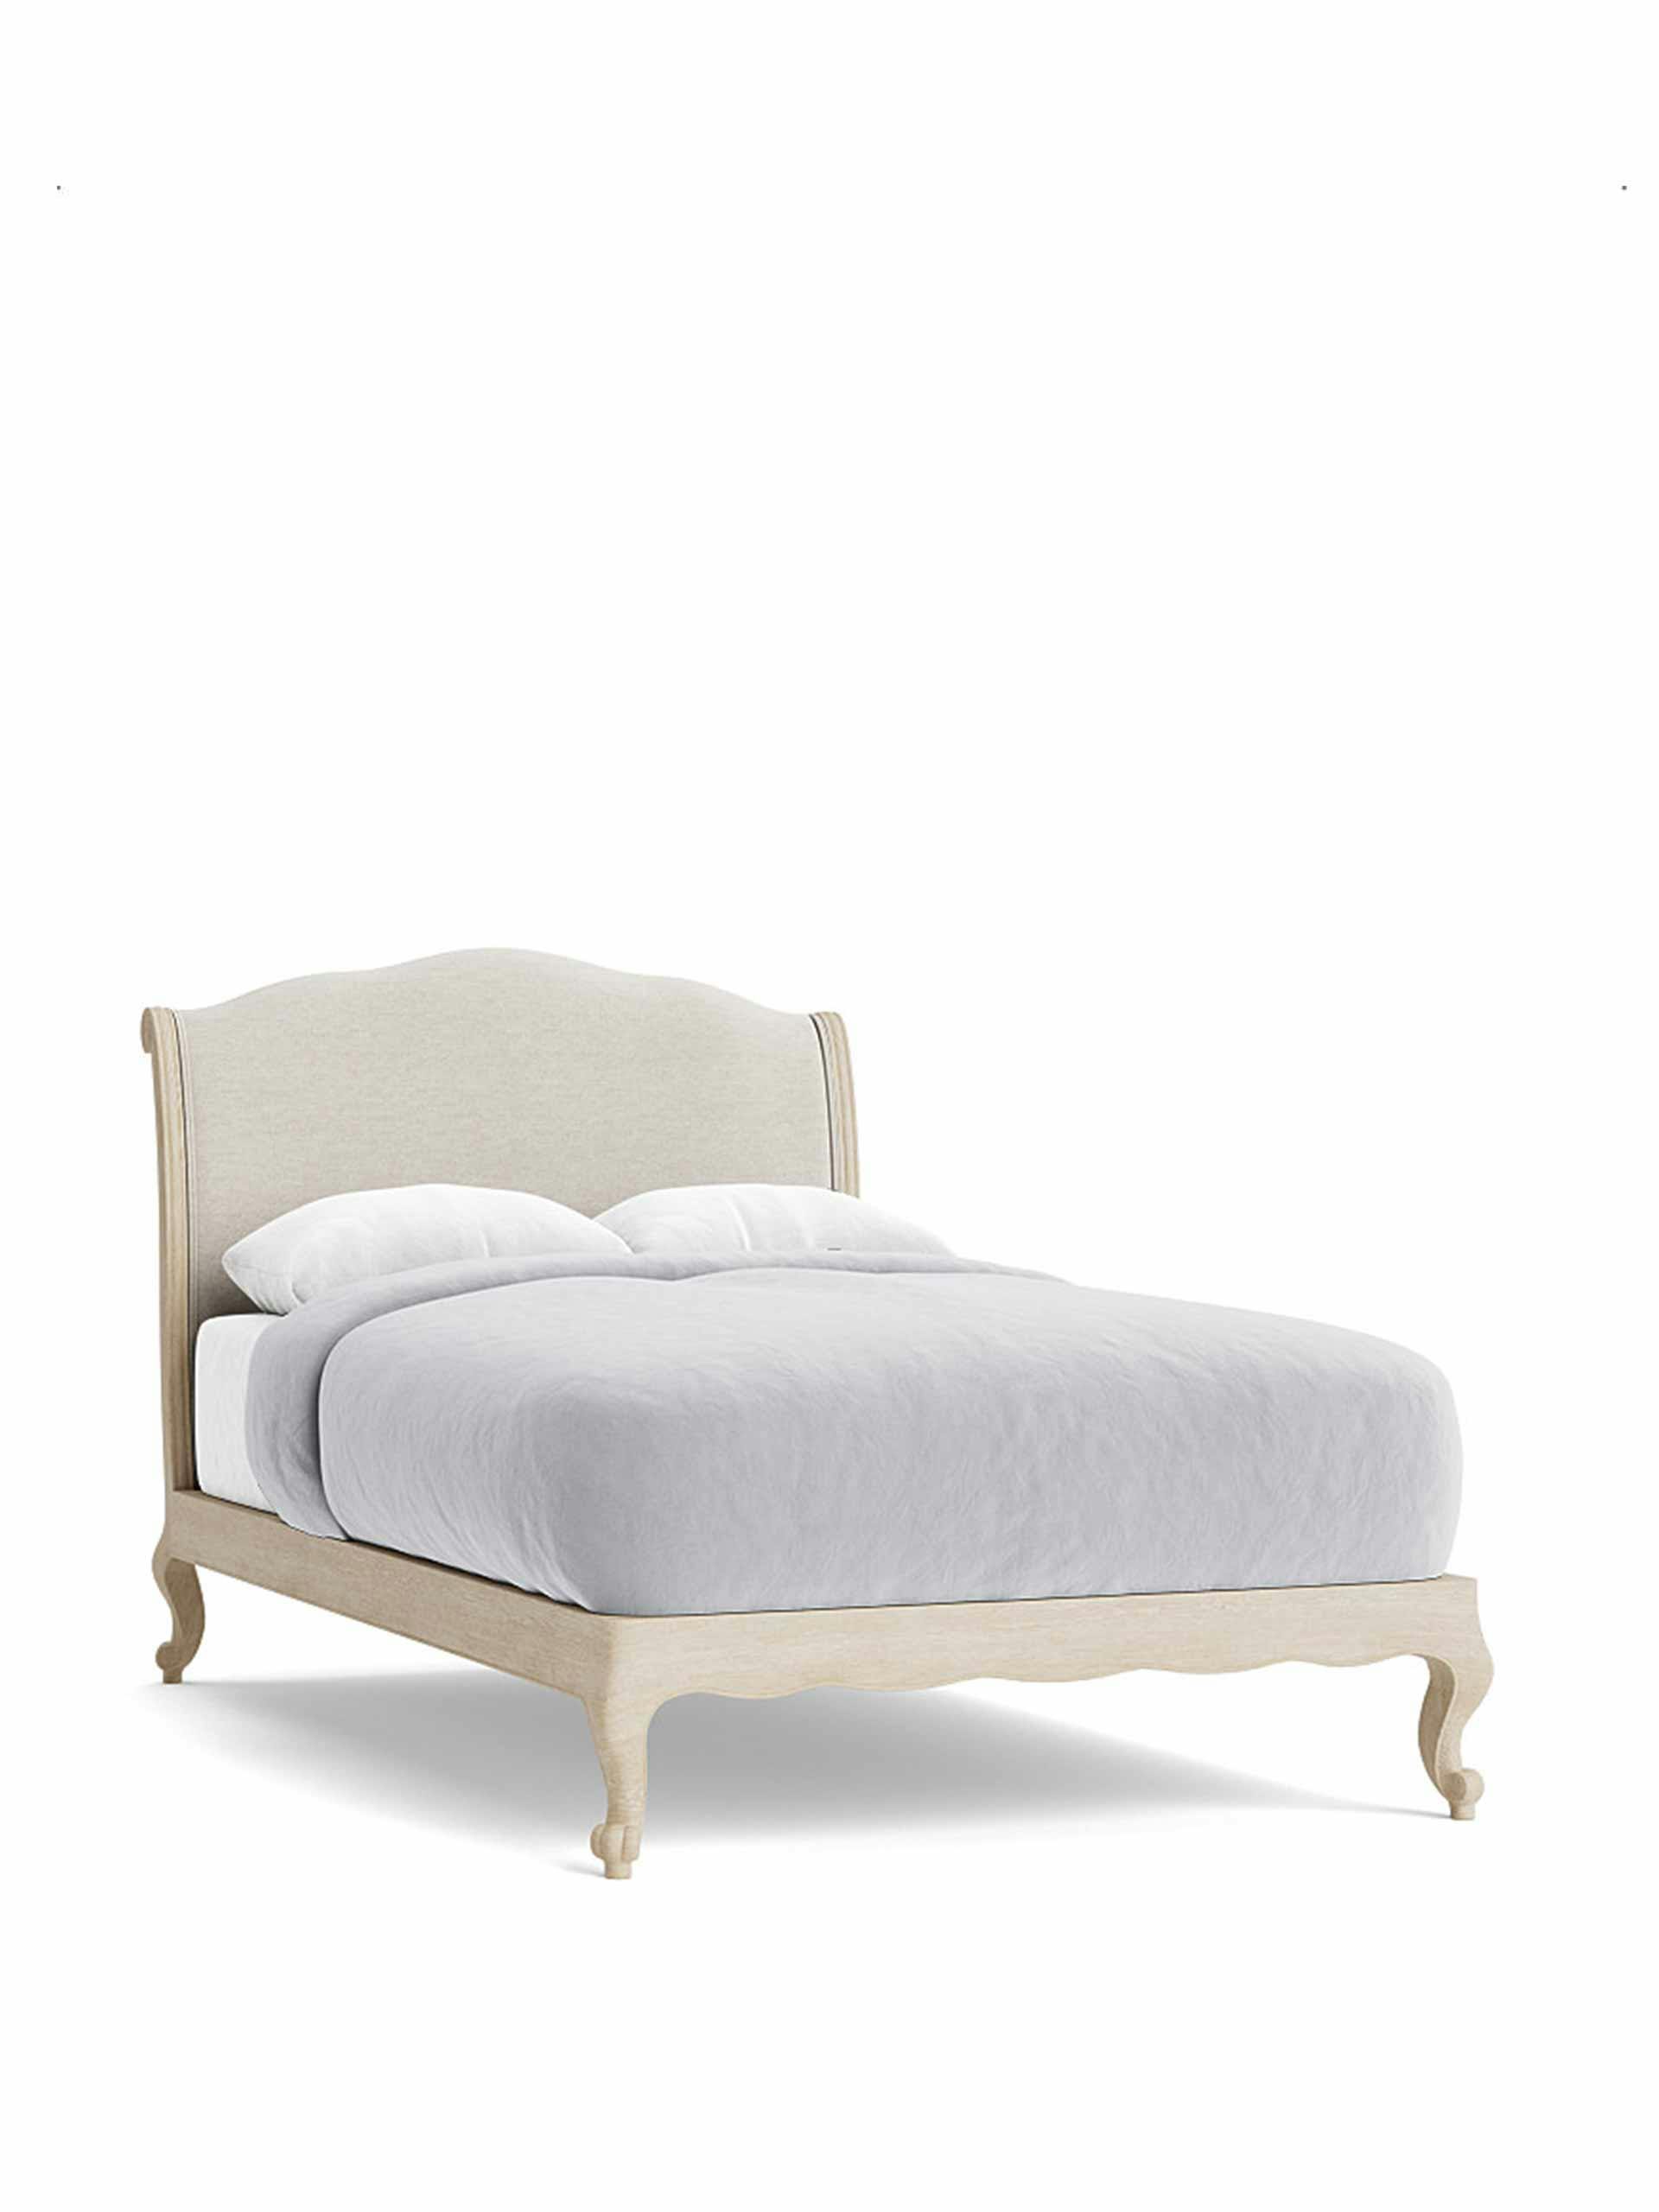 French style double bed